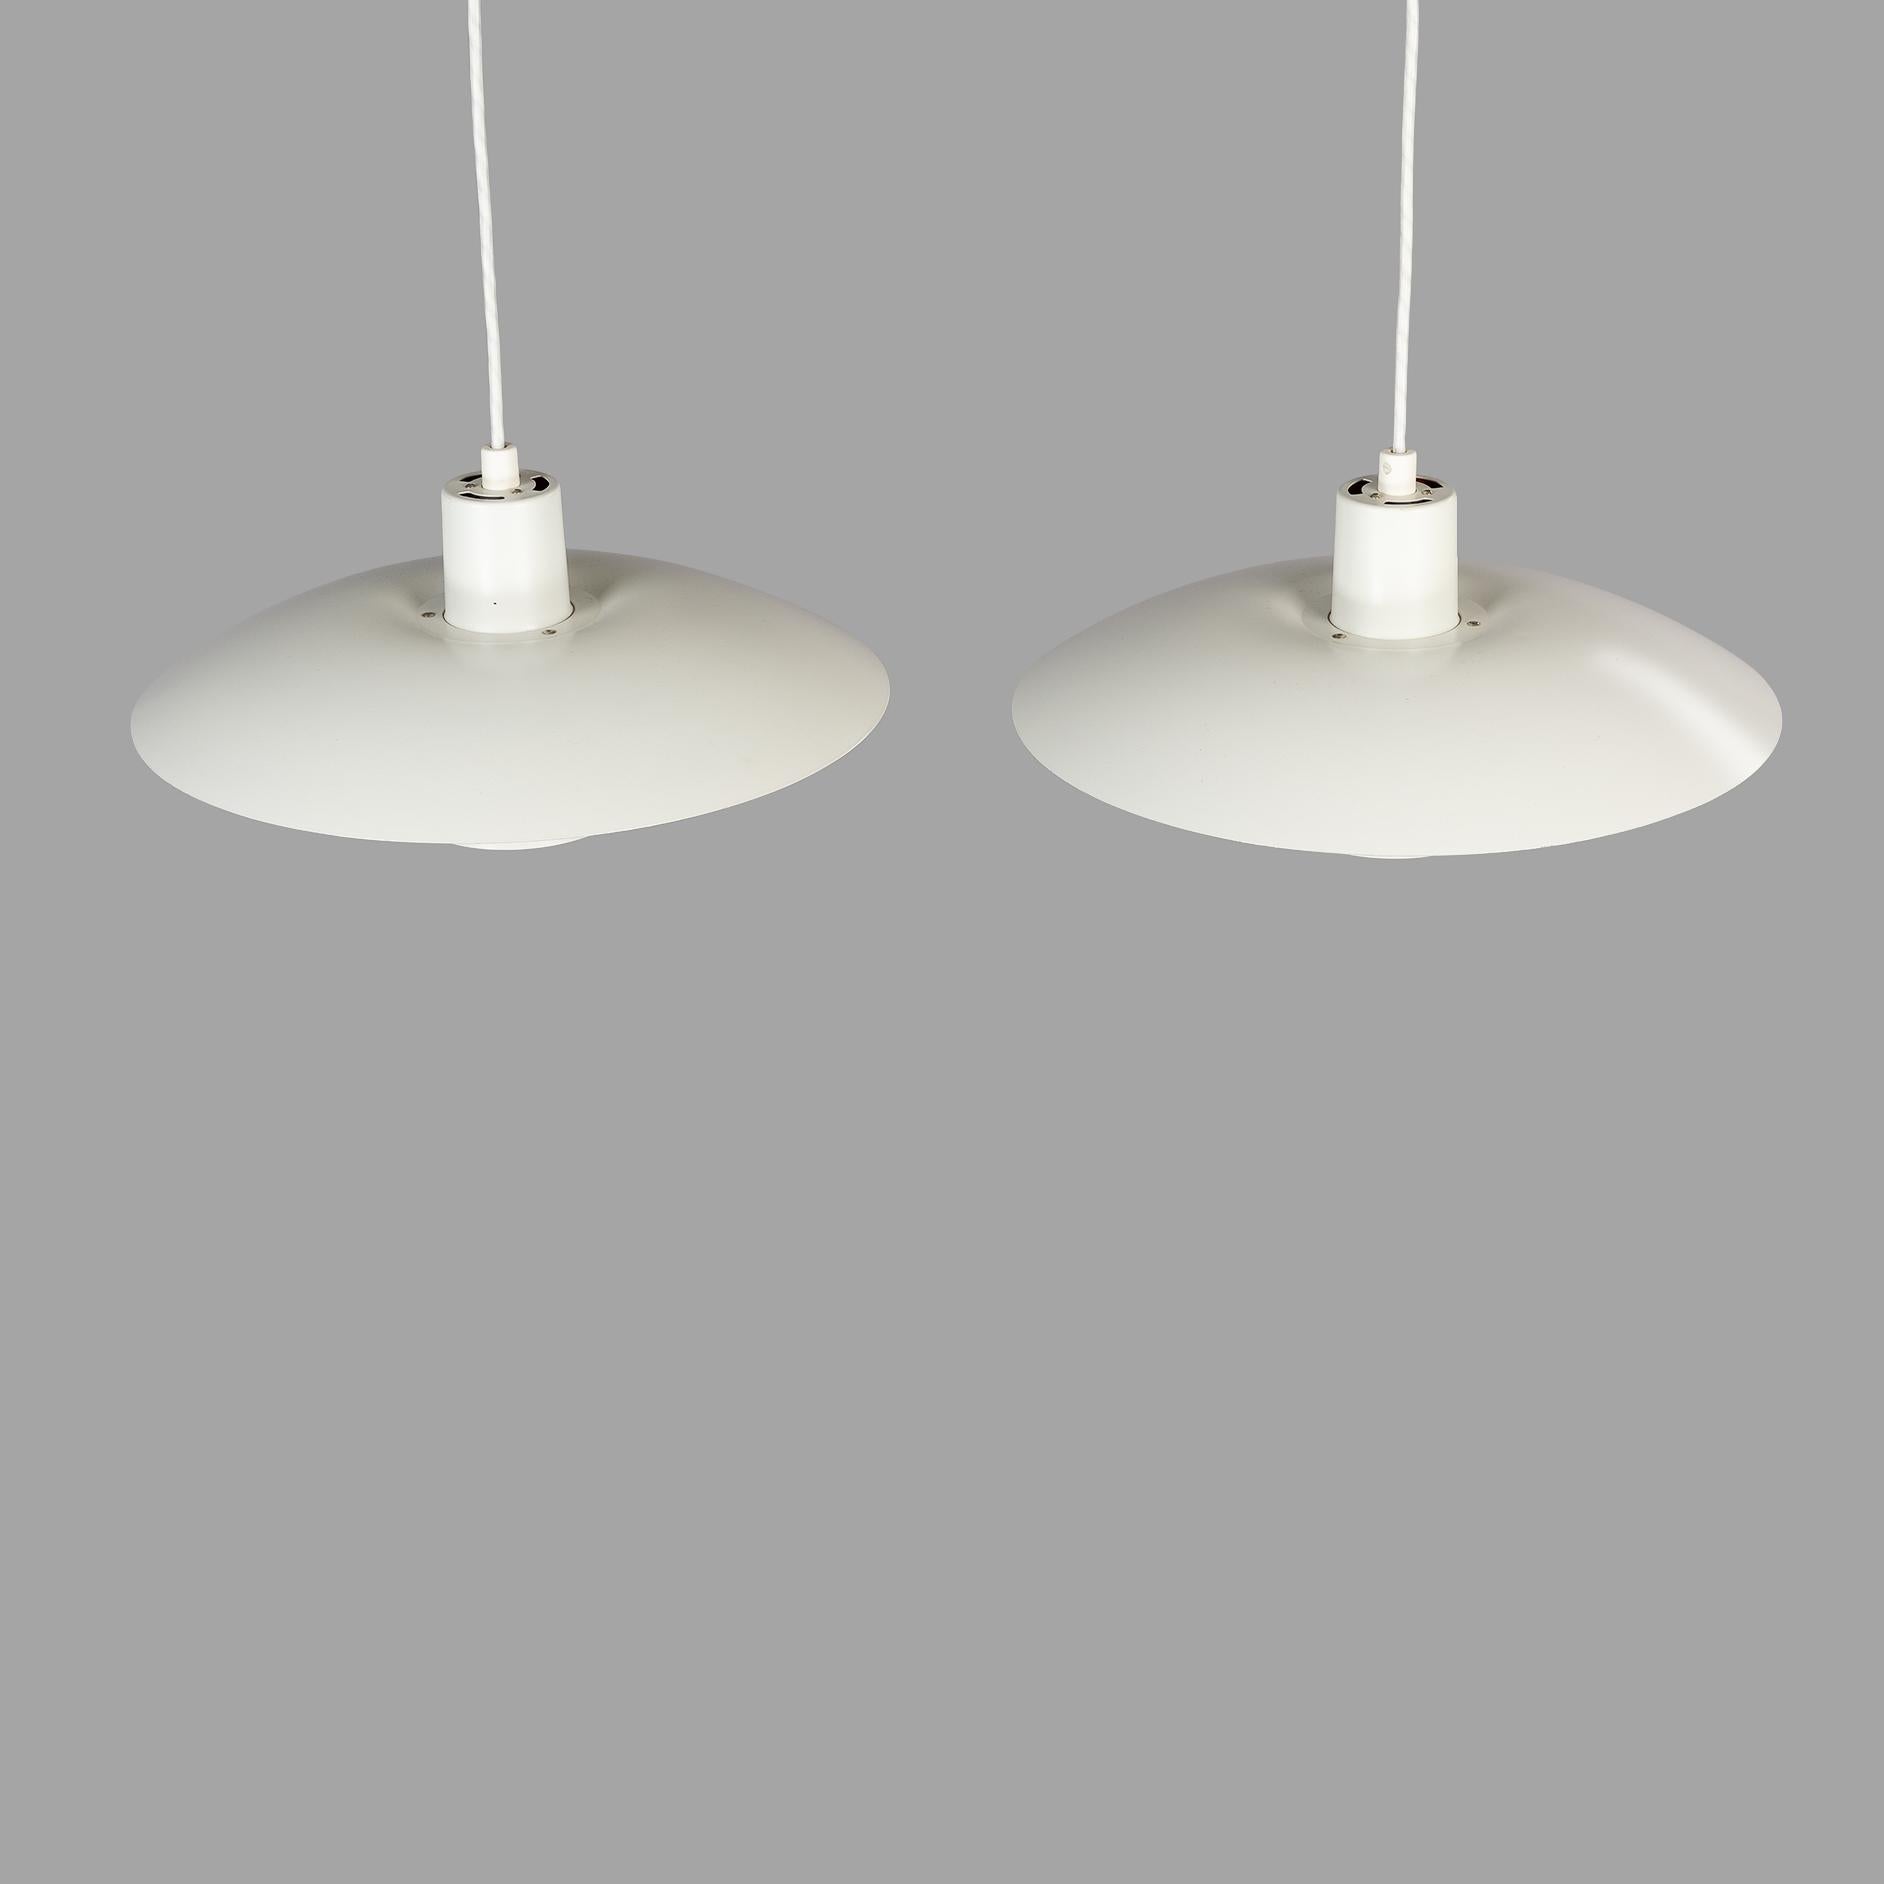 Pair of Louis Poulsen PH 4/3 lamps designed by Poul Henningsen in 1966. This set dates from a production series in the mid 70s and is made of powder coated aluminum. Overall condition is very good. The PH 4/3 was Henningsen last design for Louis